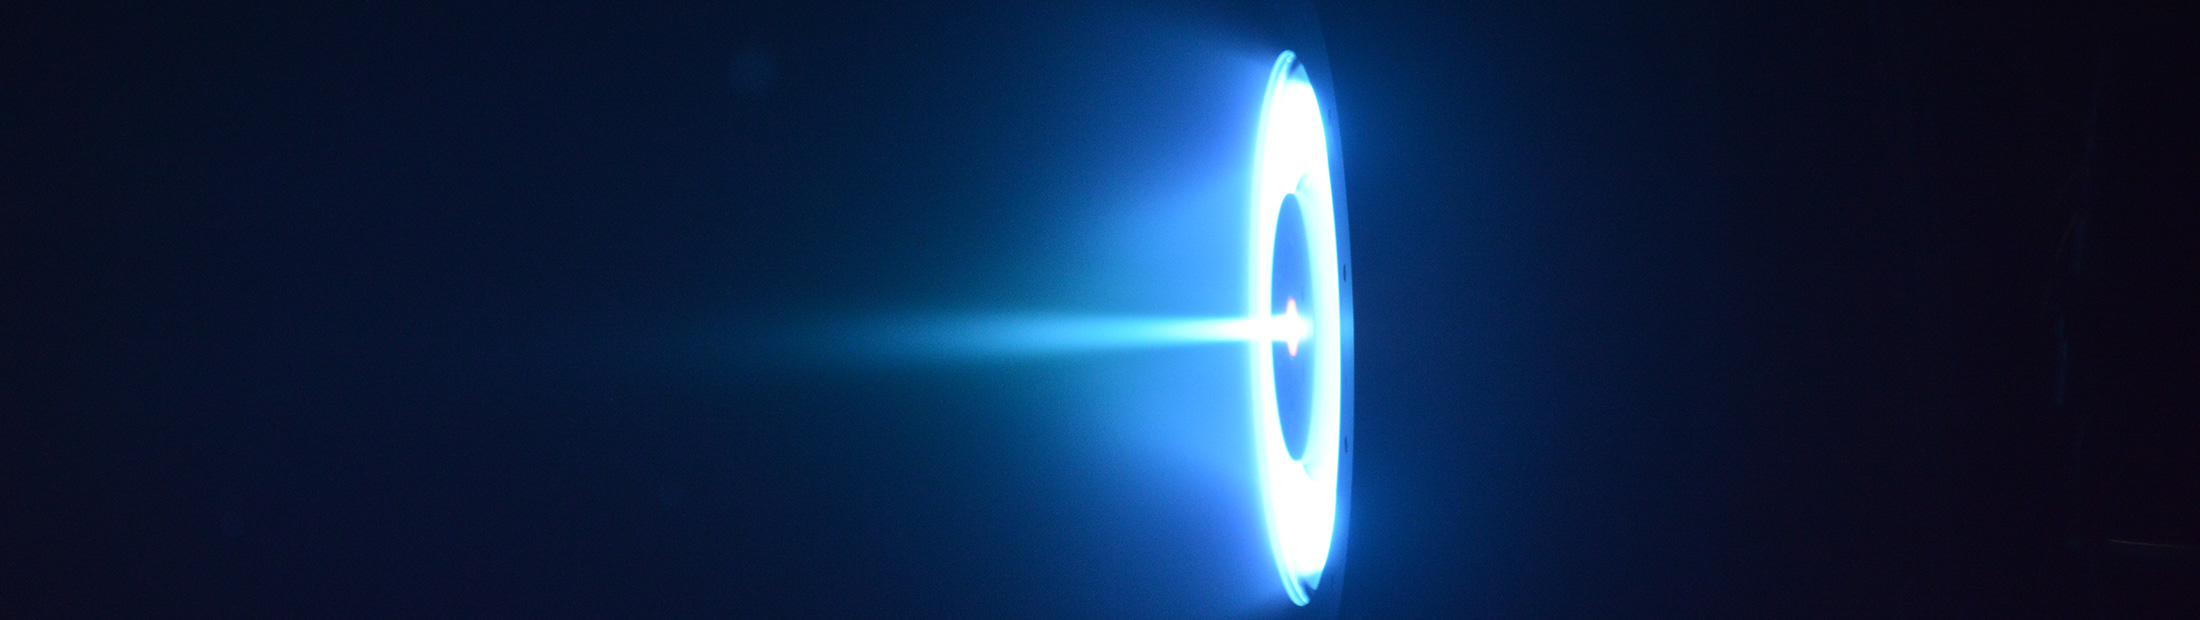 Hall thruster firing for the first time in a vacuum chamber at the Plasmadynamics and Electric Propulsion Laboratory at the University of Michigan.